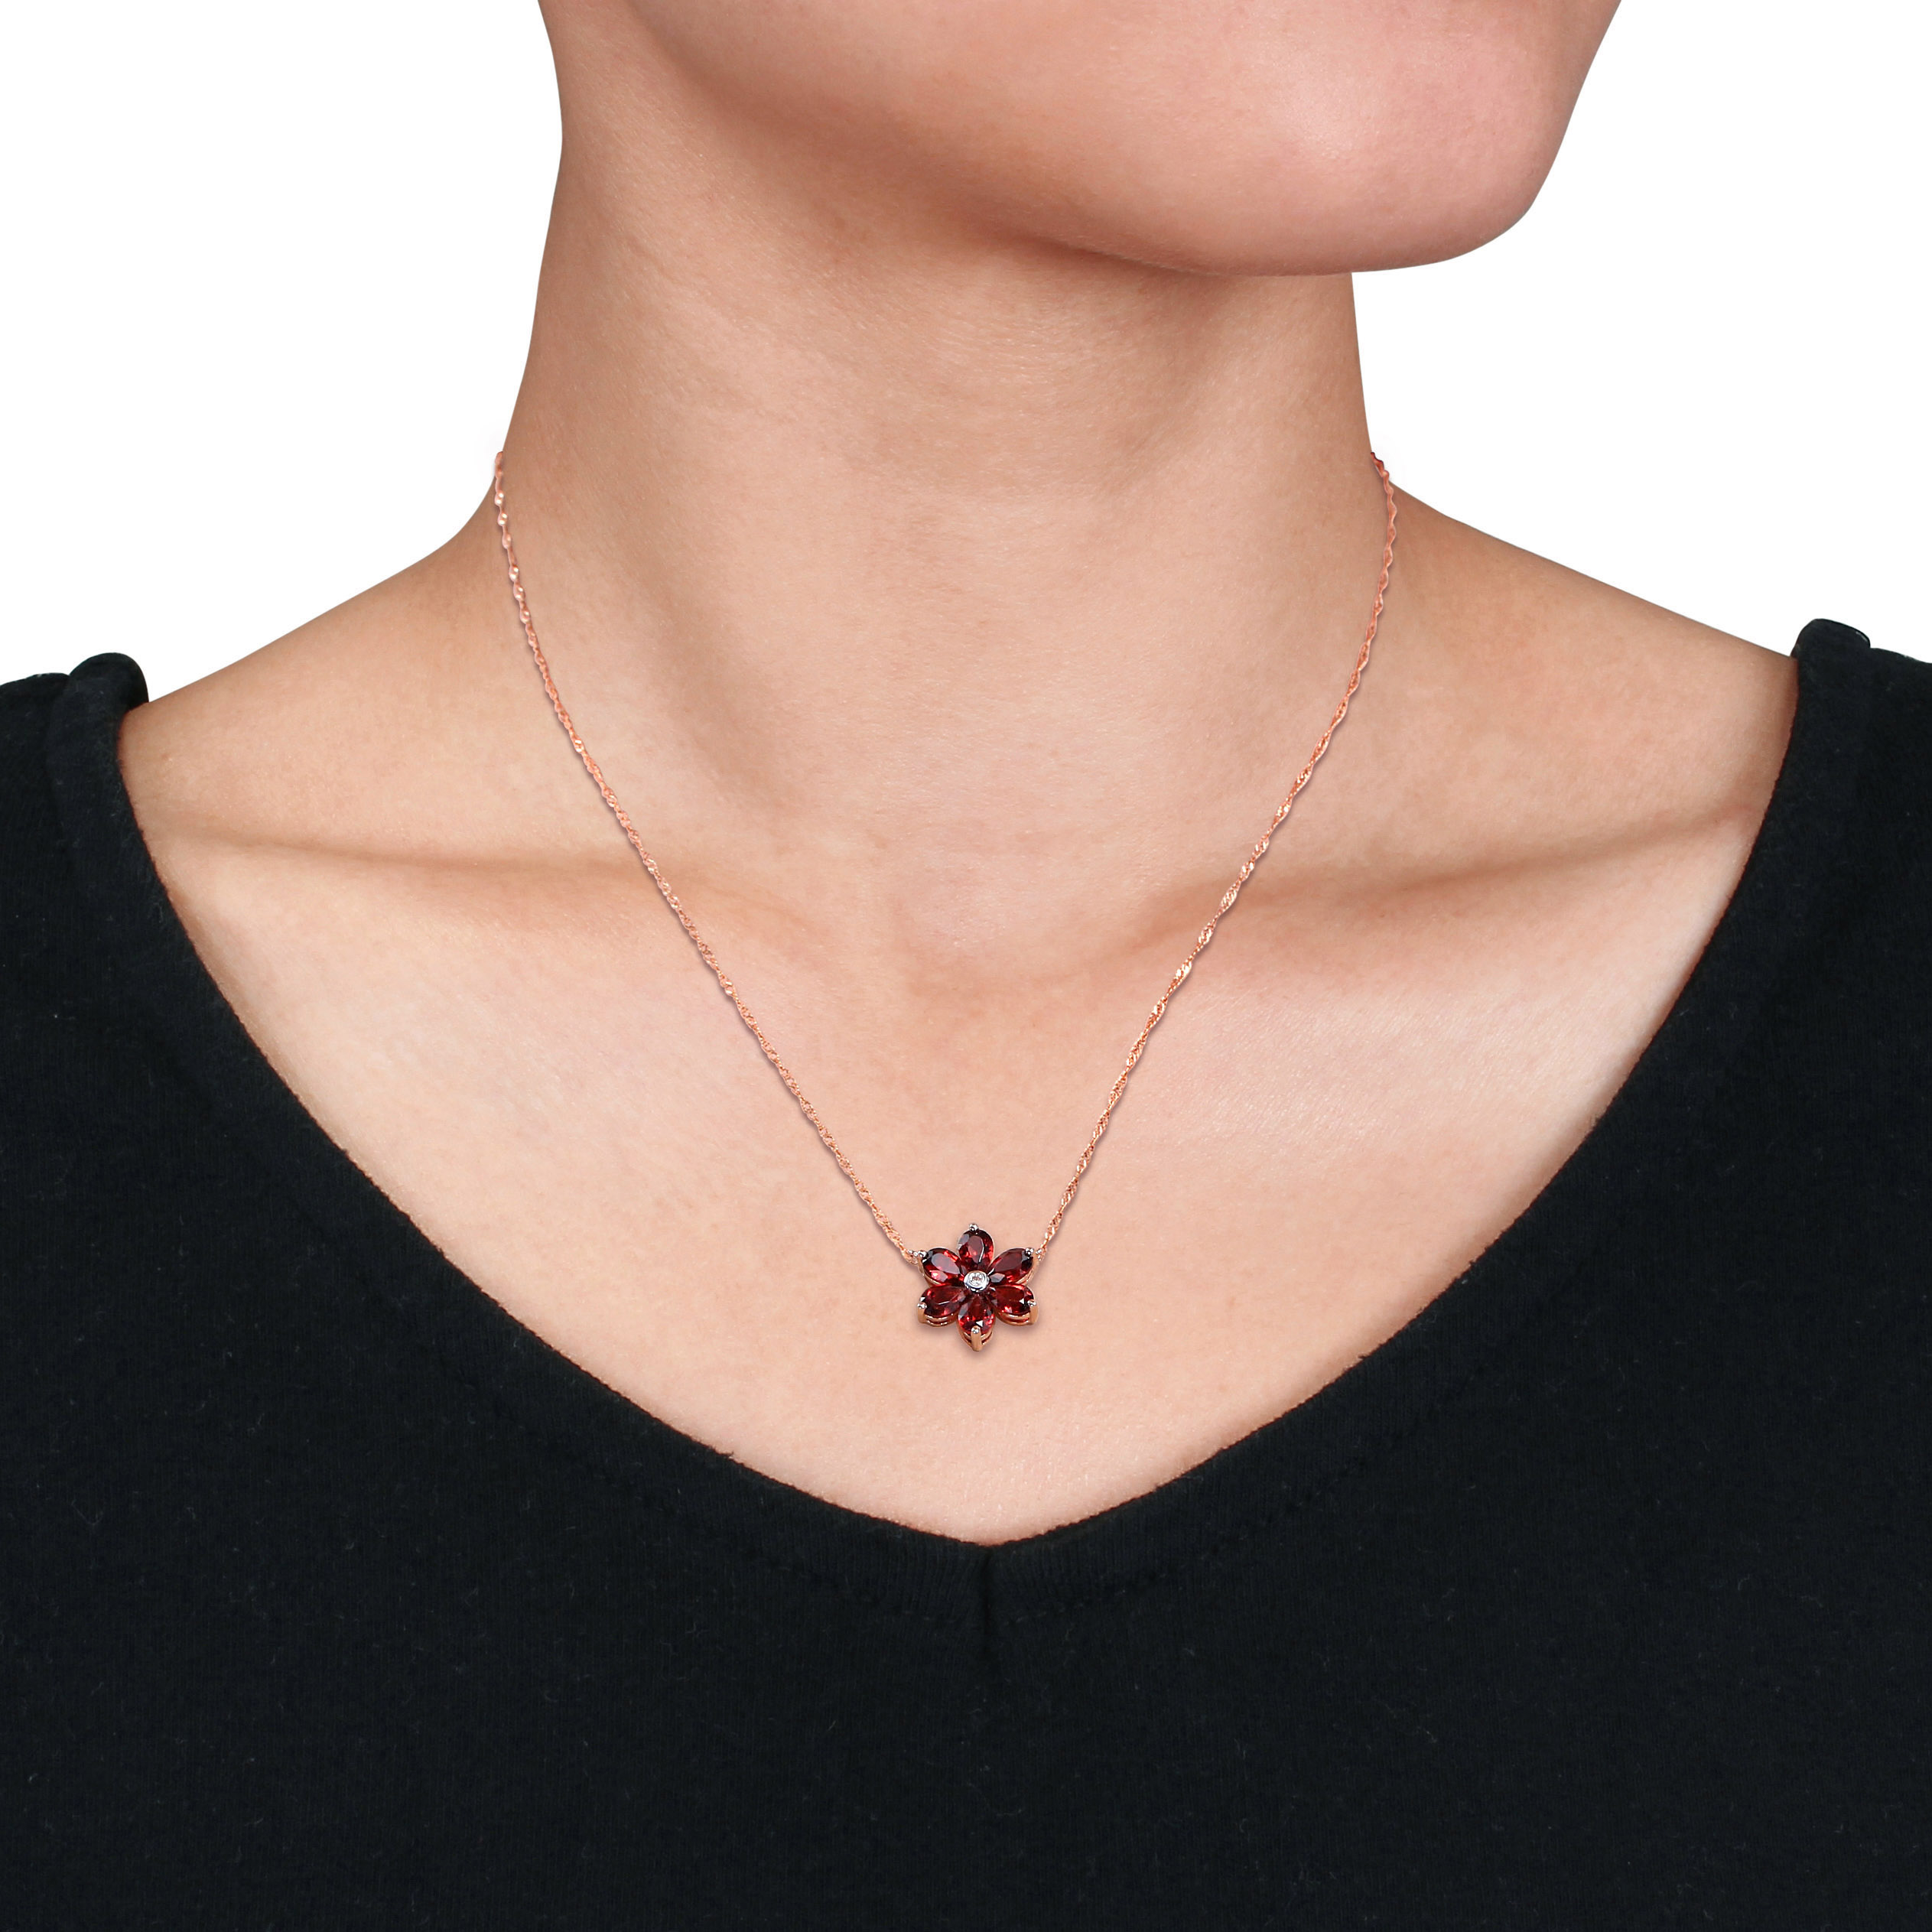 3 CT TGW Garnet and Diamond Accent Floral Pendant with Chain in 10k Rose Gold